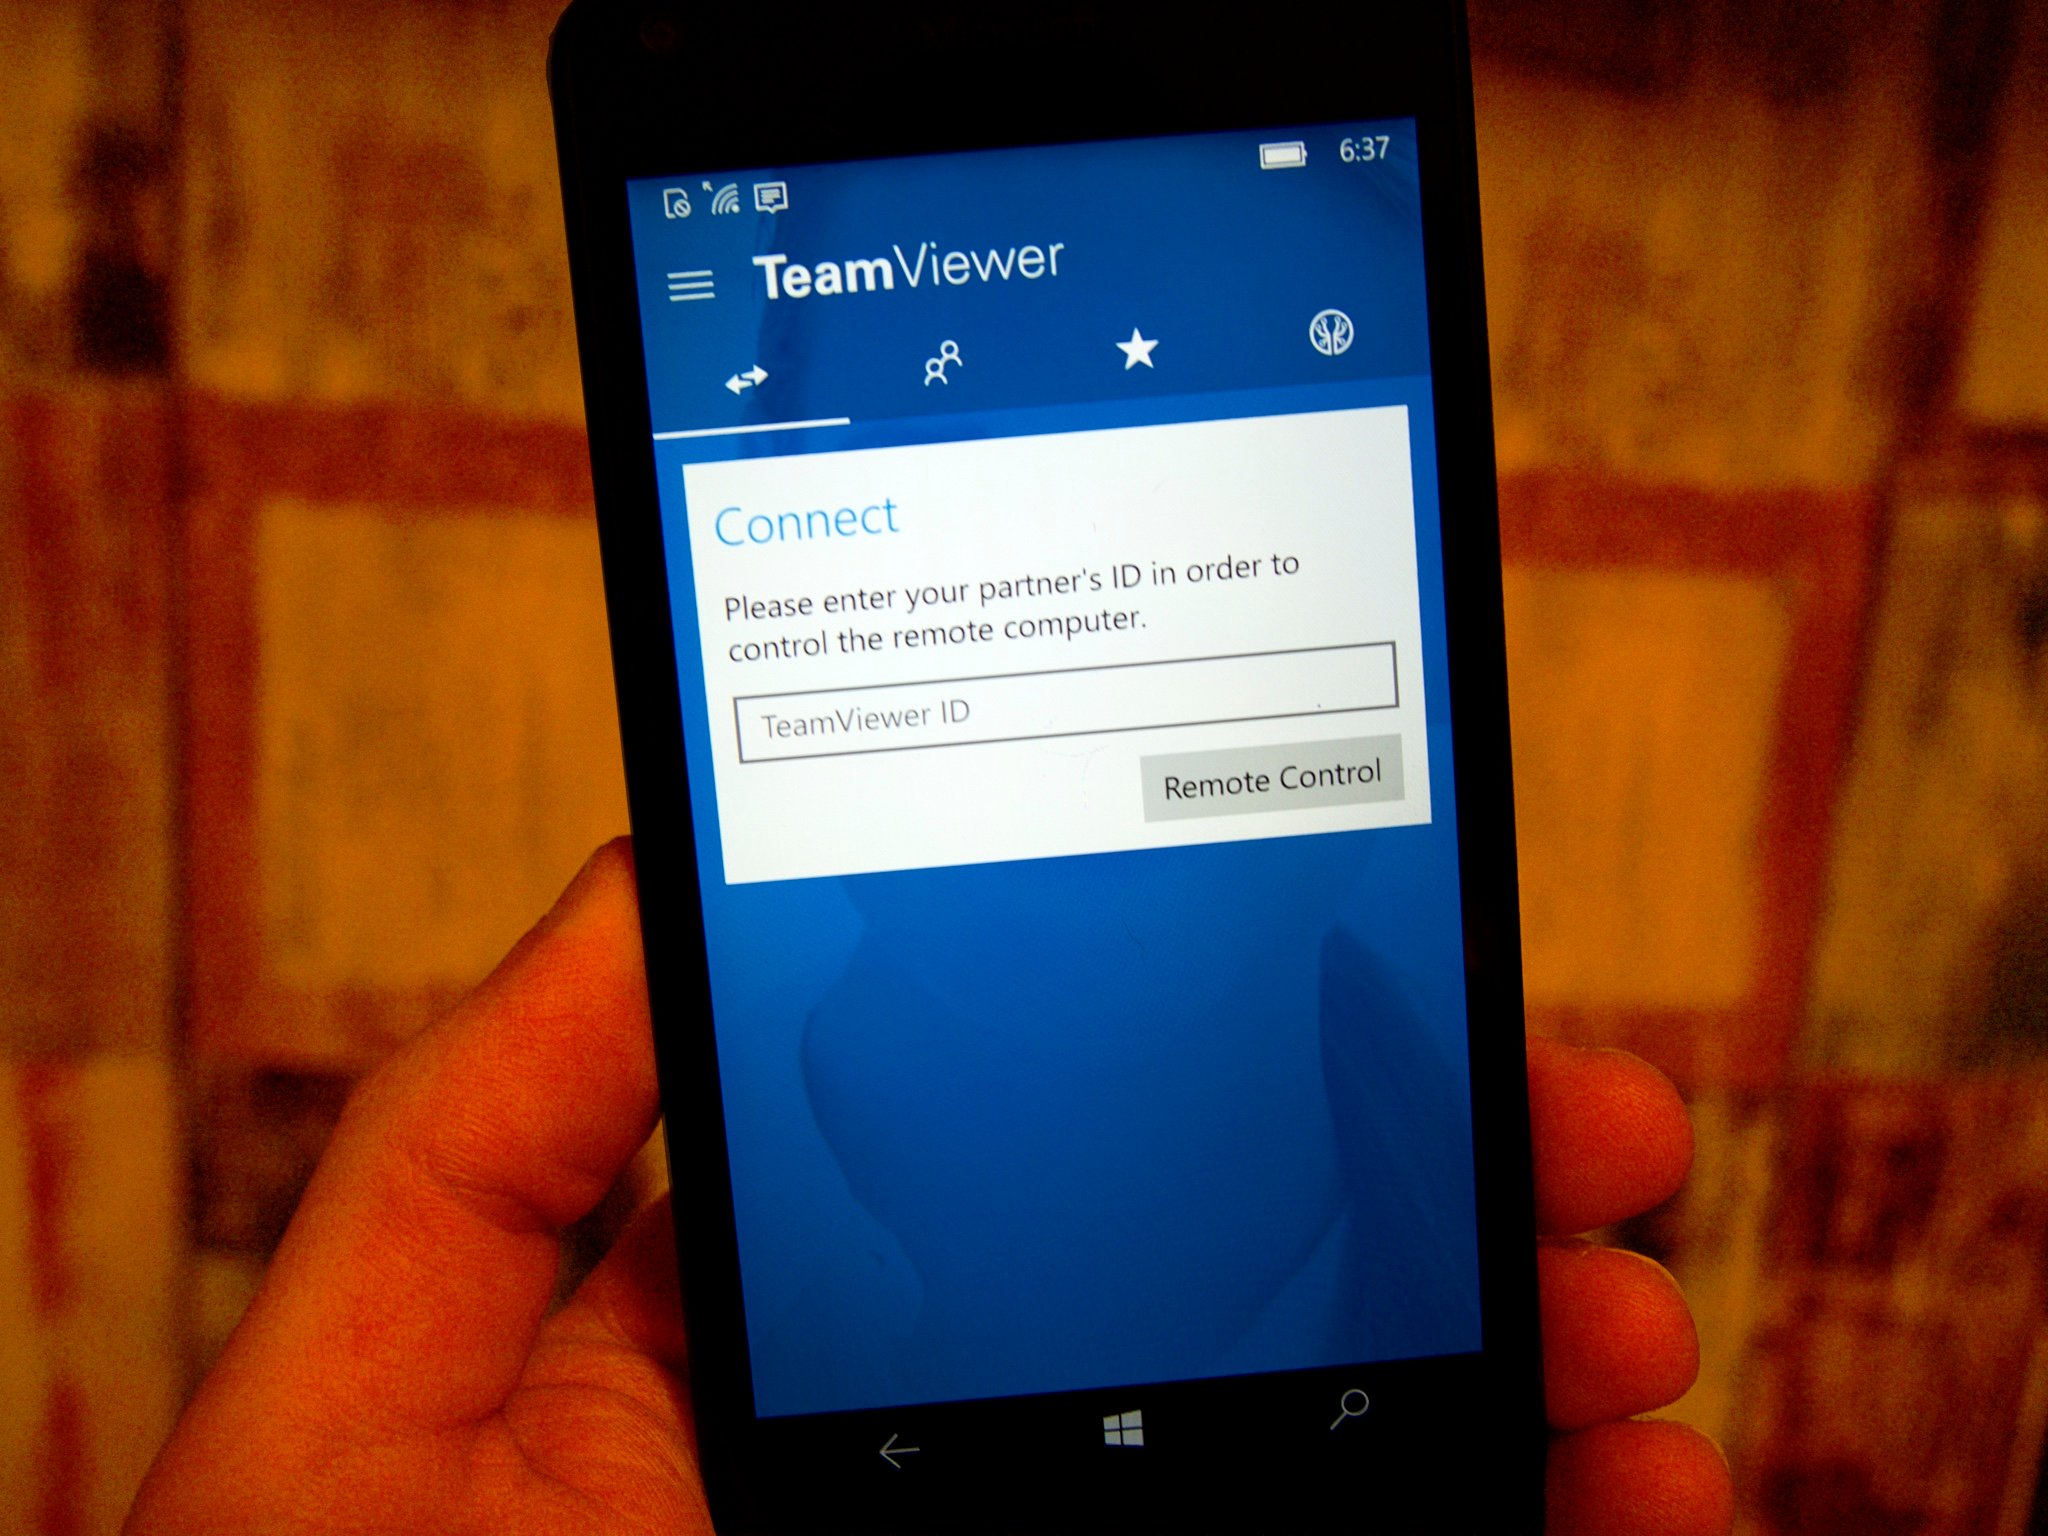 TeamViewer is now a universal app for Windows 10 desktop and mobile